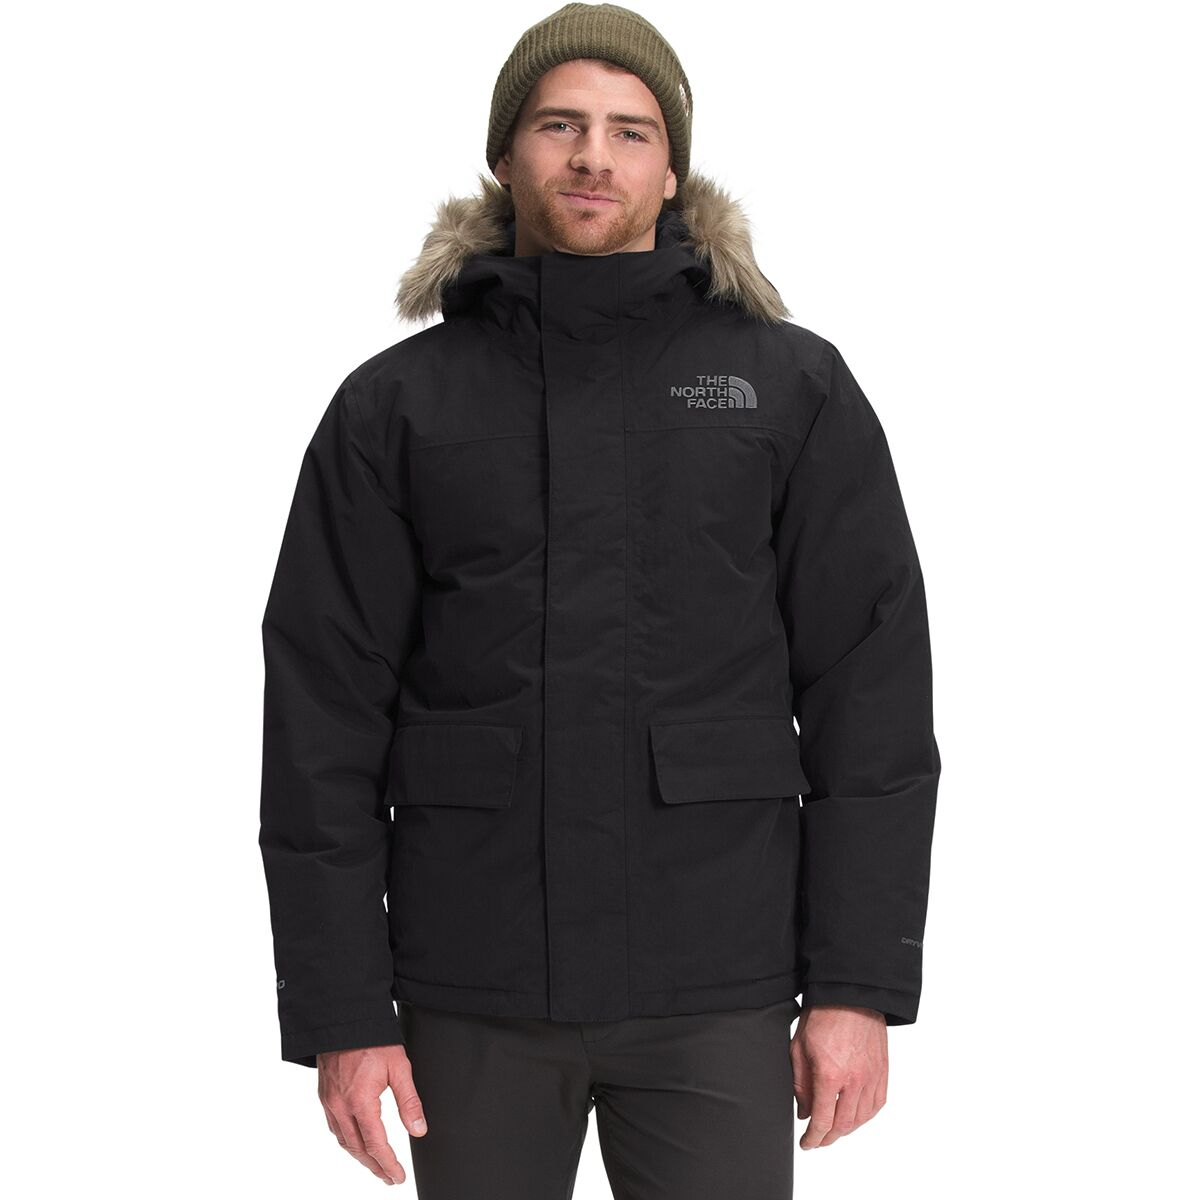 The North Face 北面 男款派克外套 7.5折 $262.46（约1751元）